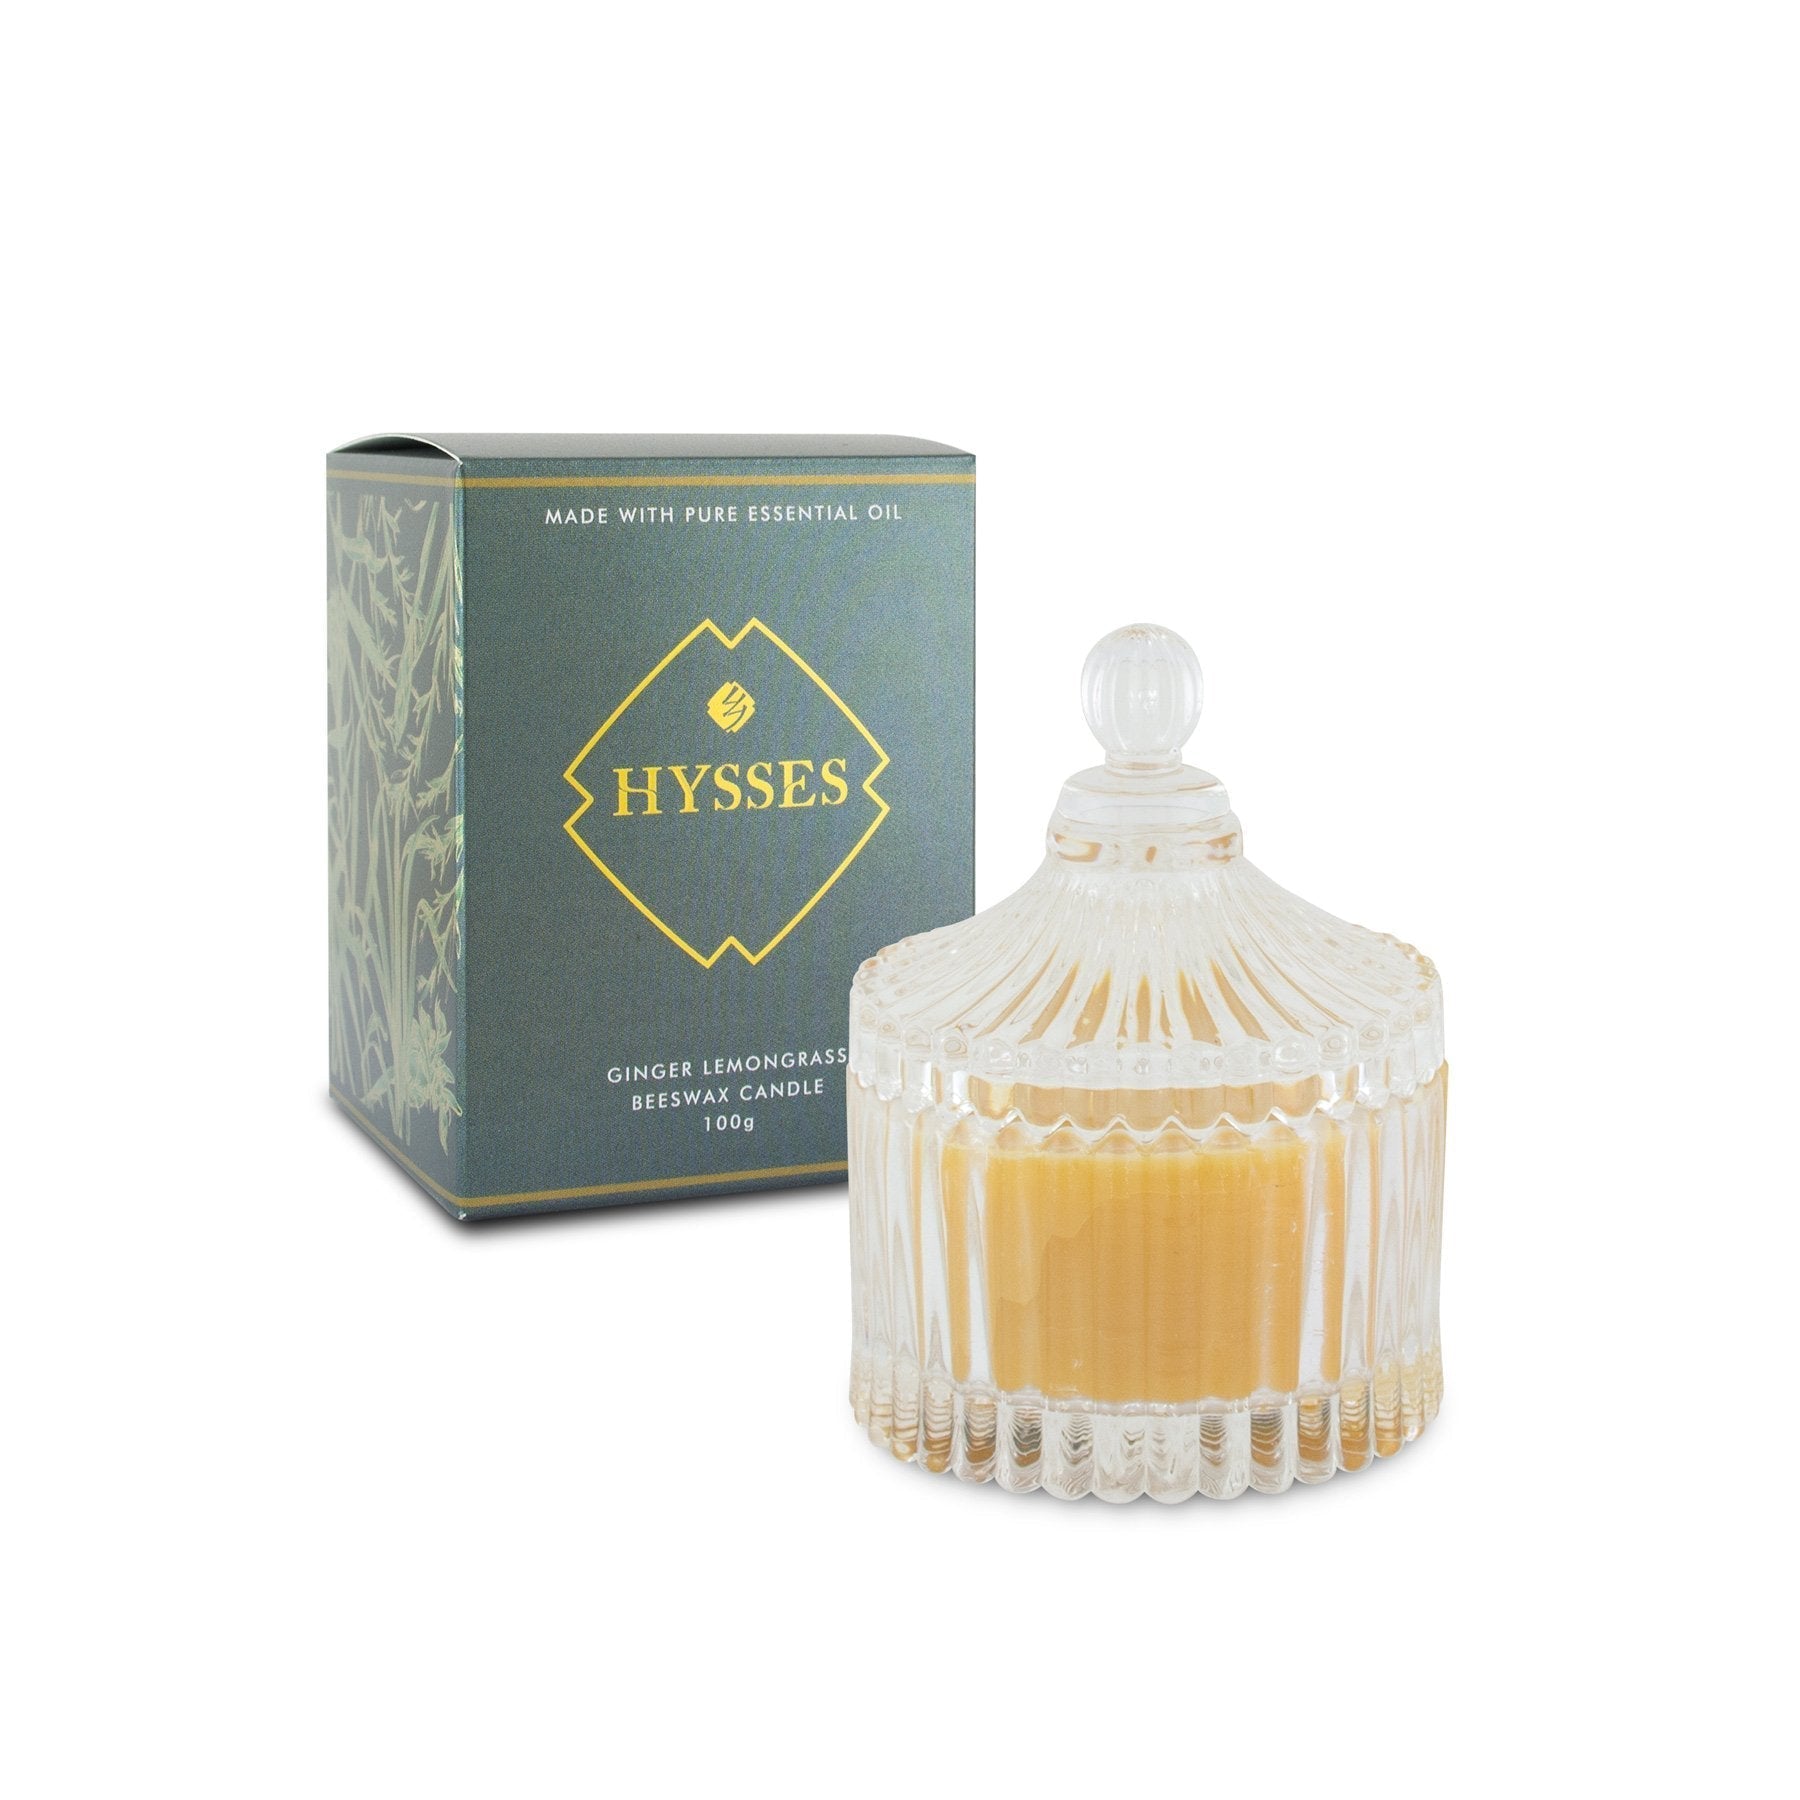 Hysses Home Scents 200g Beeswax Candle Ginger Lemongrass 200g